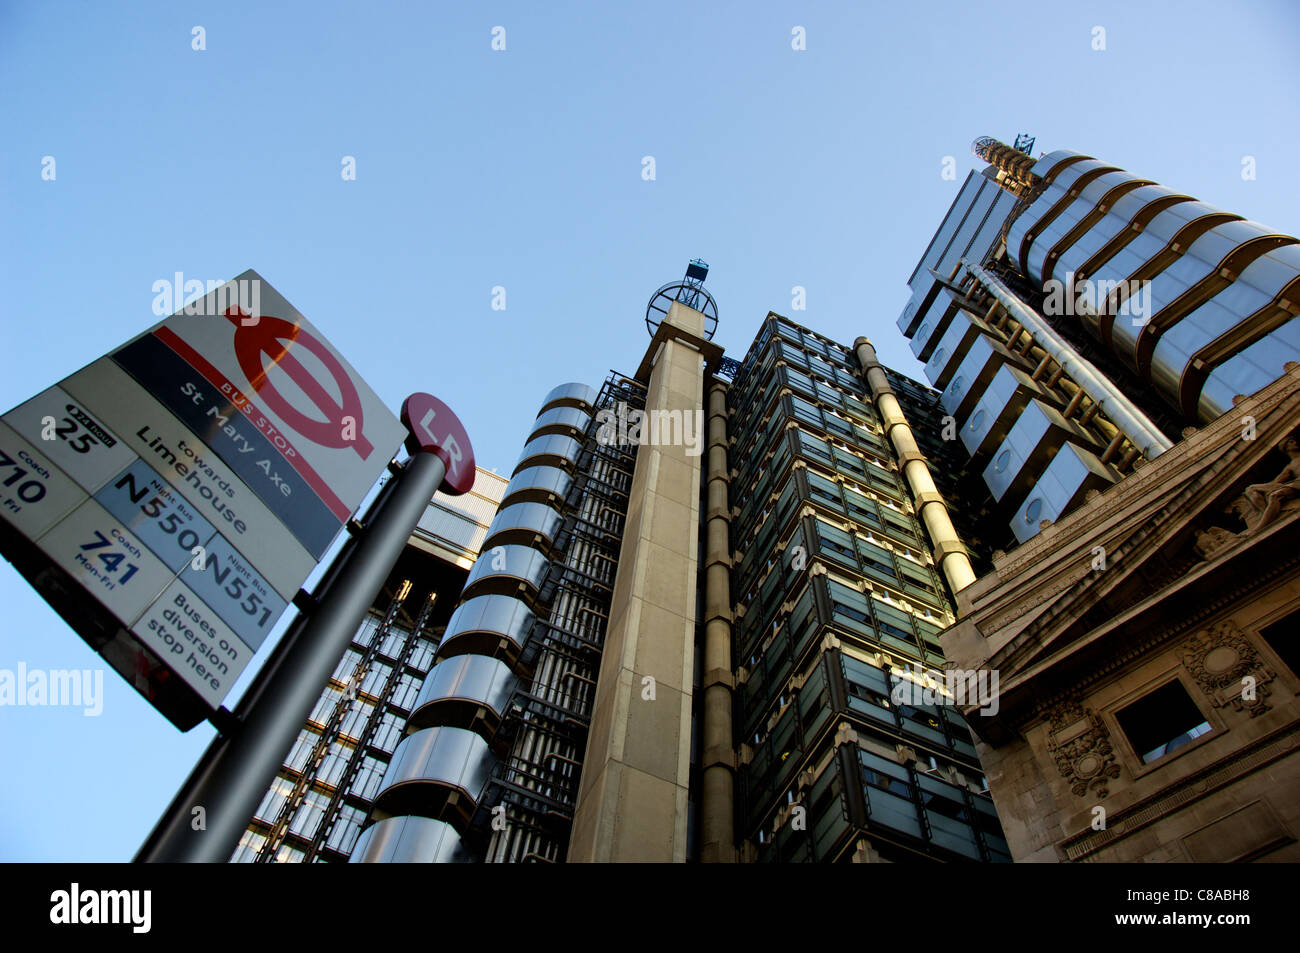 Bus stop by the Lloyds building Stock Photo